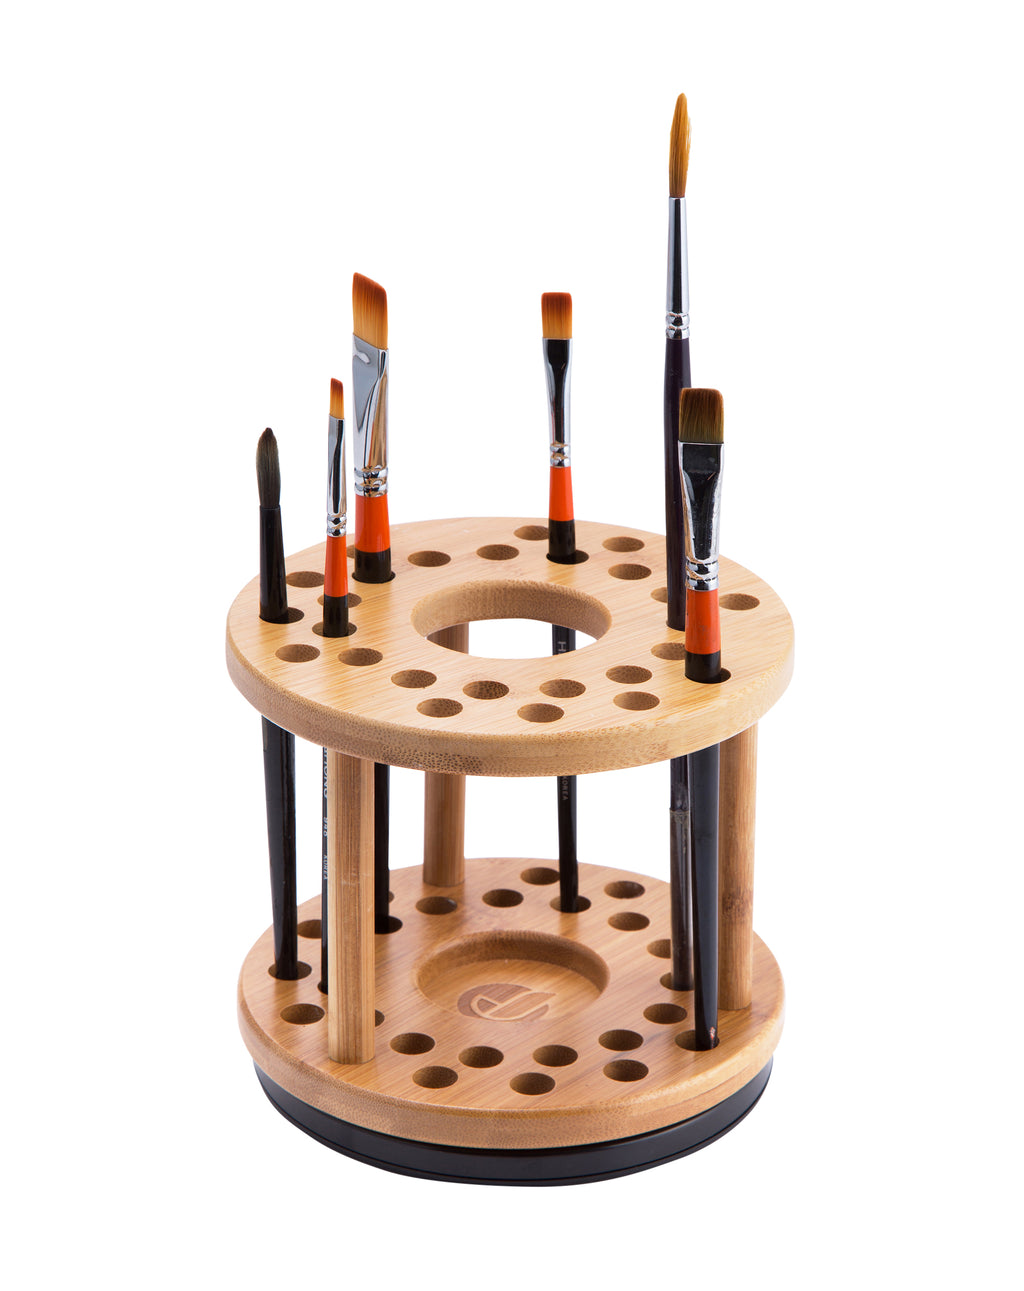 3D Printed HEX Paint Brush Holder by Cambridge Design